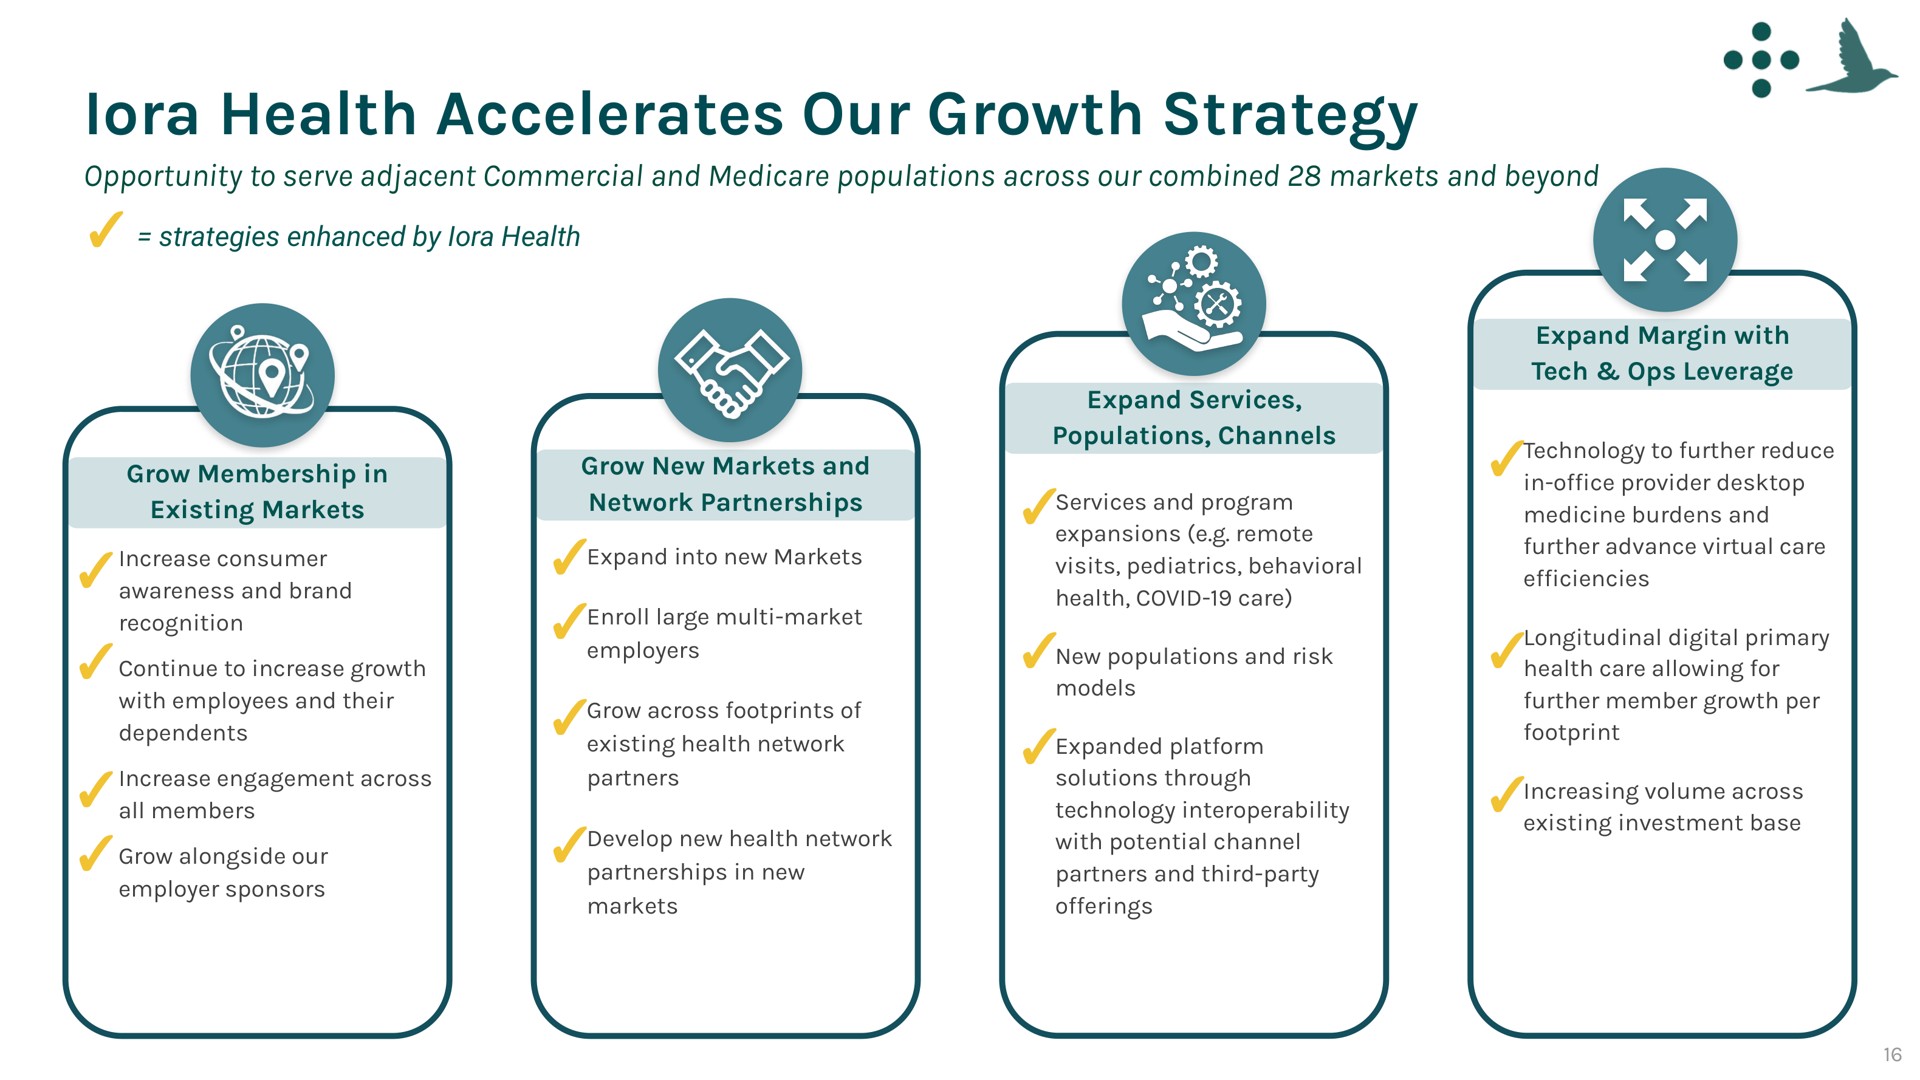 health accelerates our growth strategy lora | One Medical